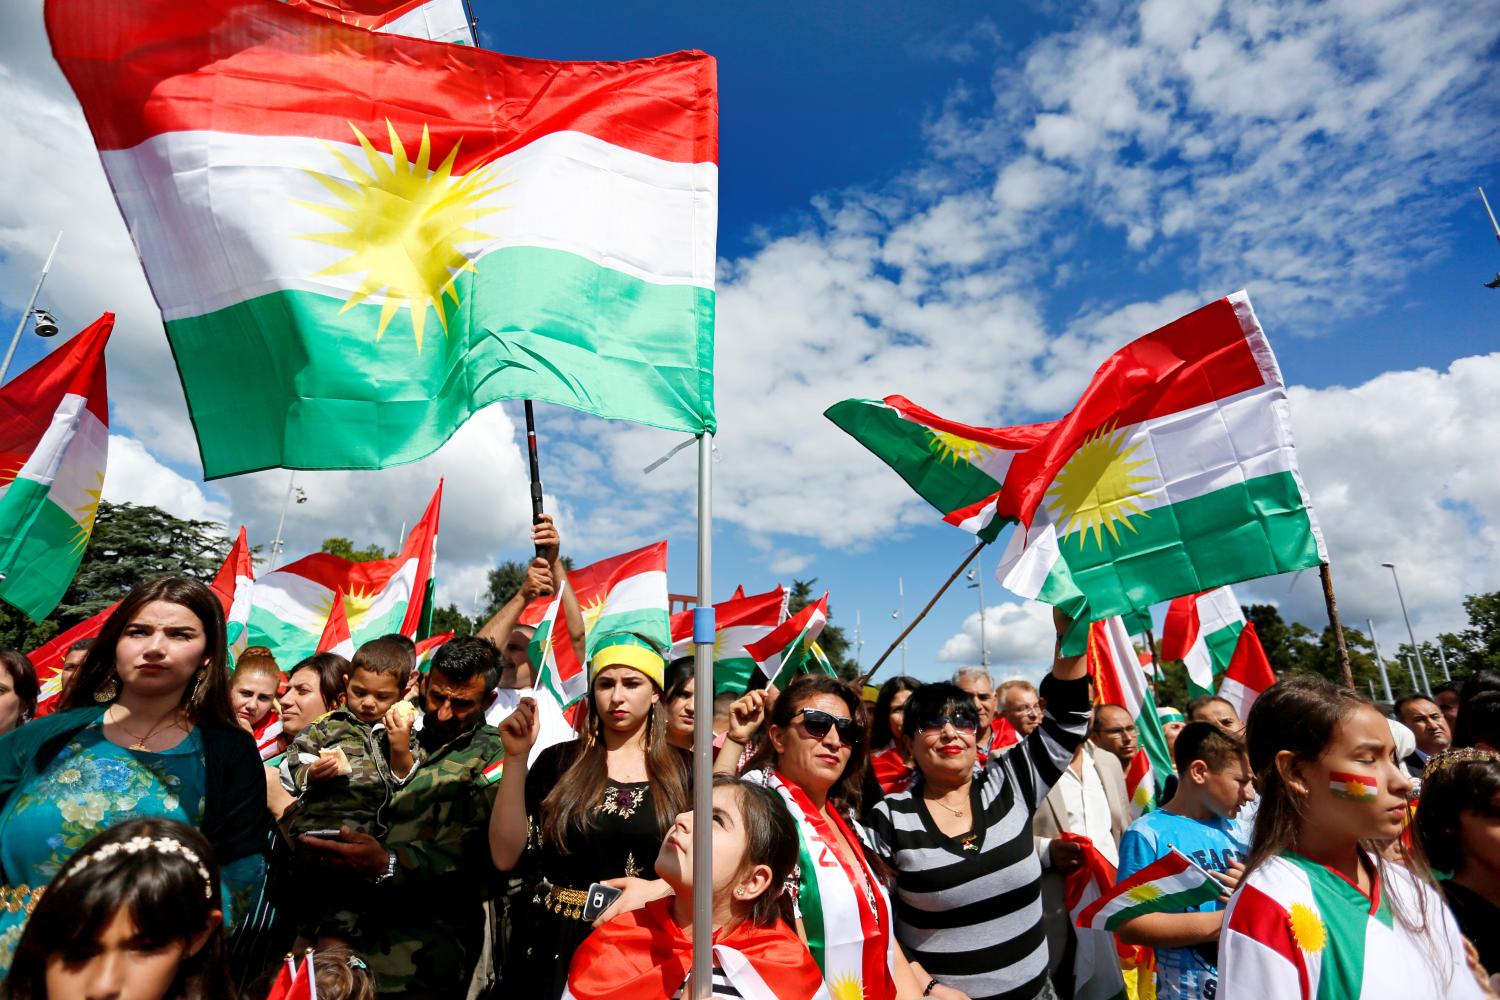 People attend a demonstration in support of the referendum for independence of Kurdish Iraq in front of the Palais des Nations in Geneva, Switzerland September 10, 2017.